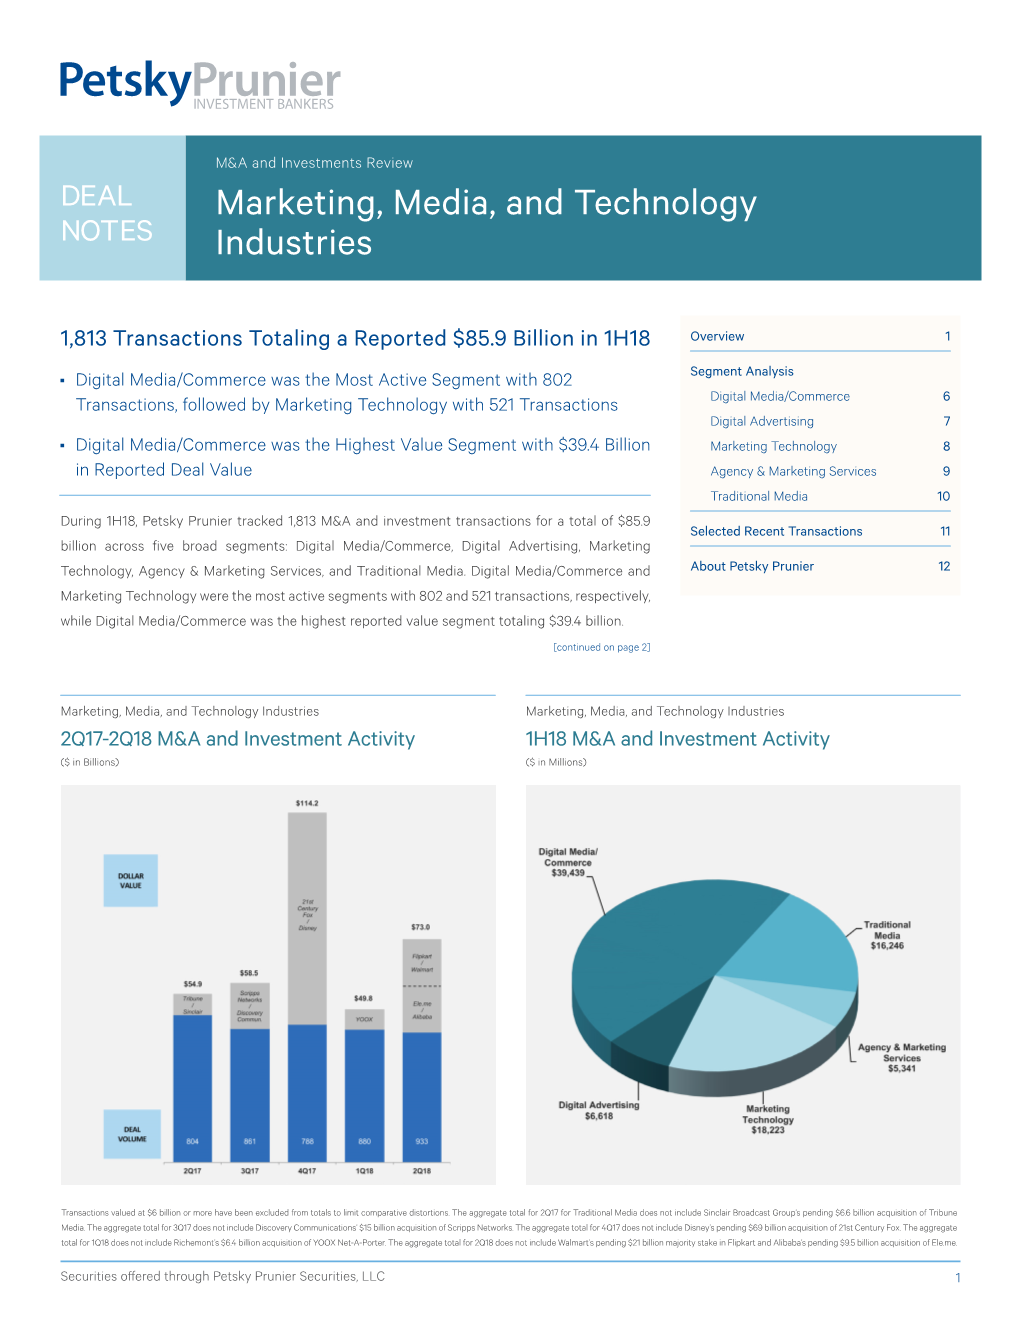 Download Marketing, Media, and Technology Industries